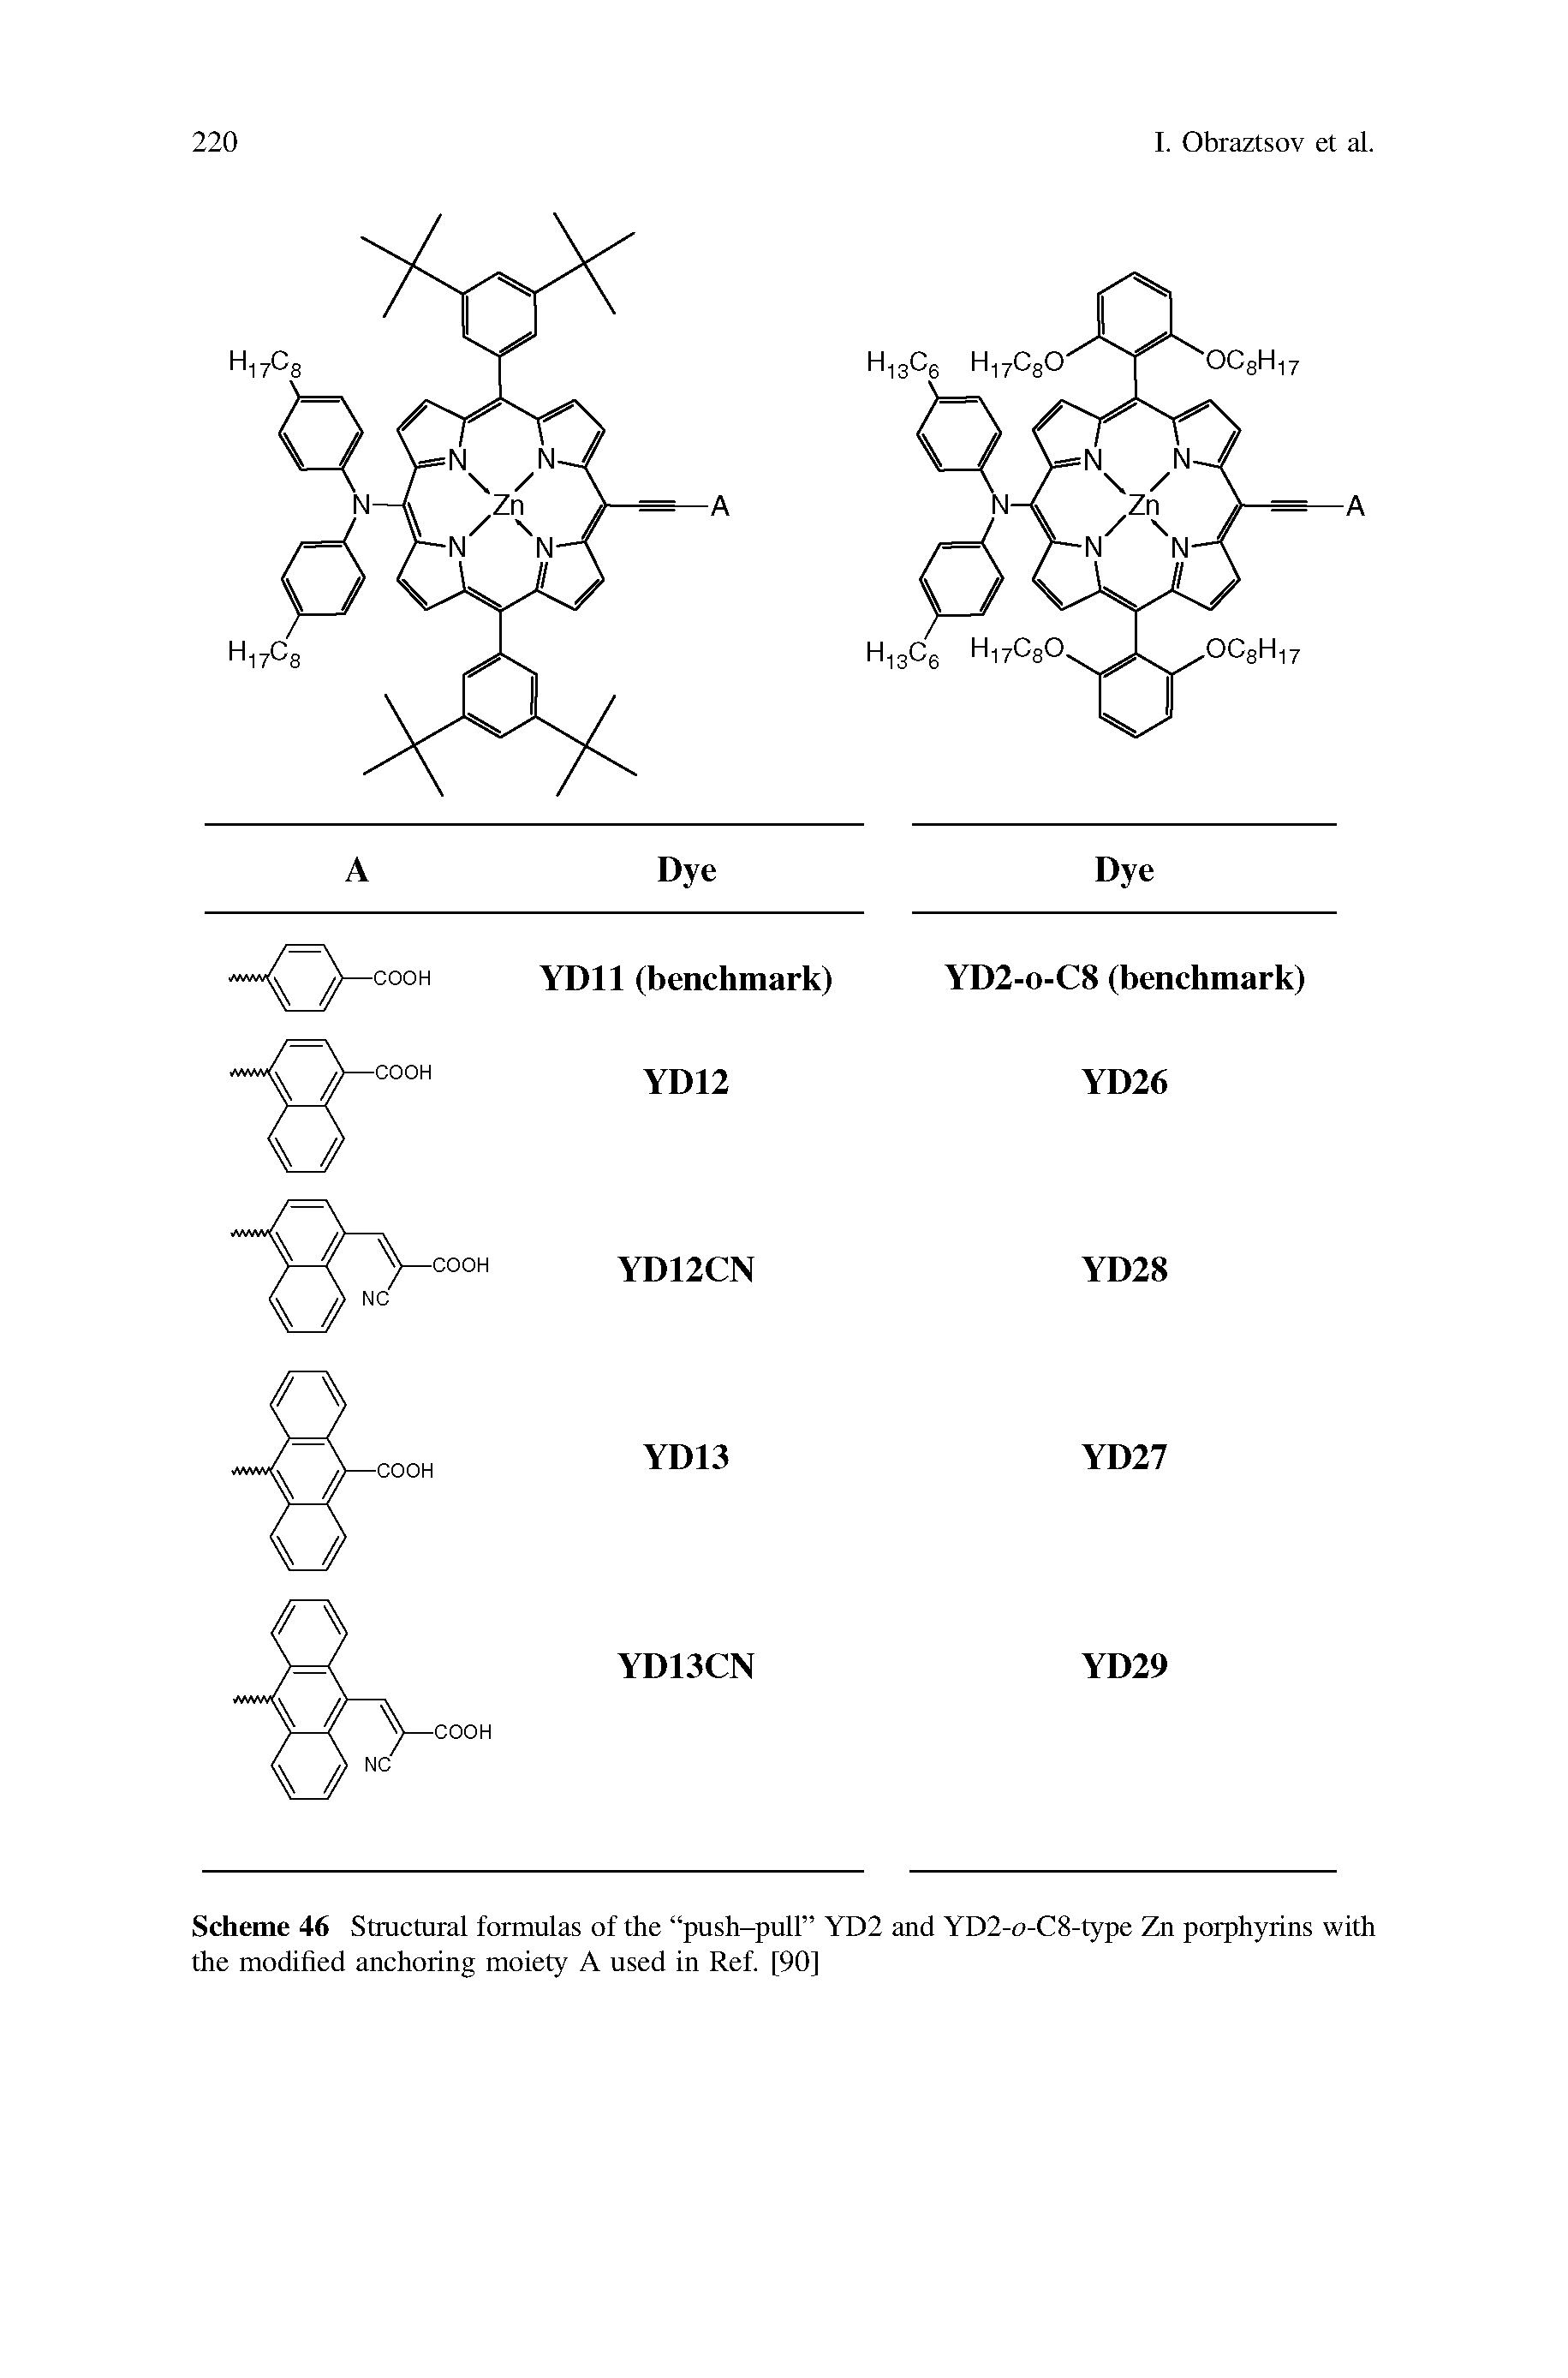 Scheme 46 Stmctural formulas of the push-pull YD2 and YD2-o-C8-type Zn porphyrins with the modified anchoring moiety A used in Ref [90]...